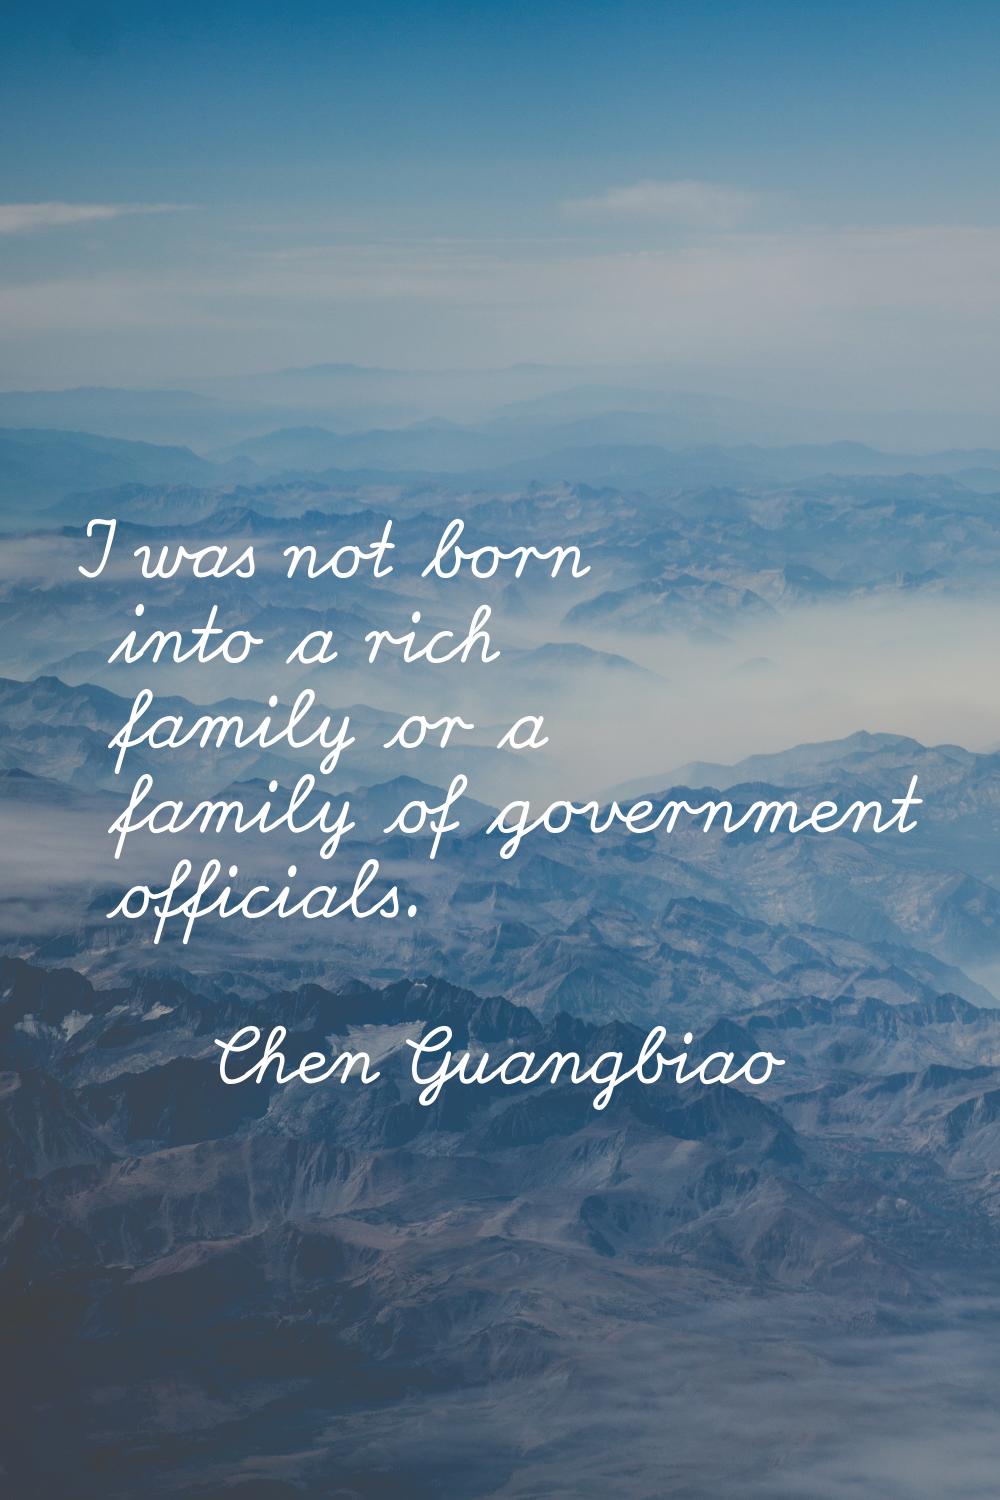 I was not born into a rich family or a family of government officials.